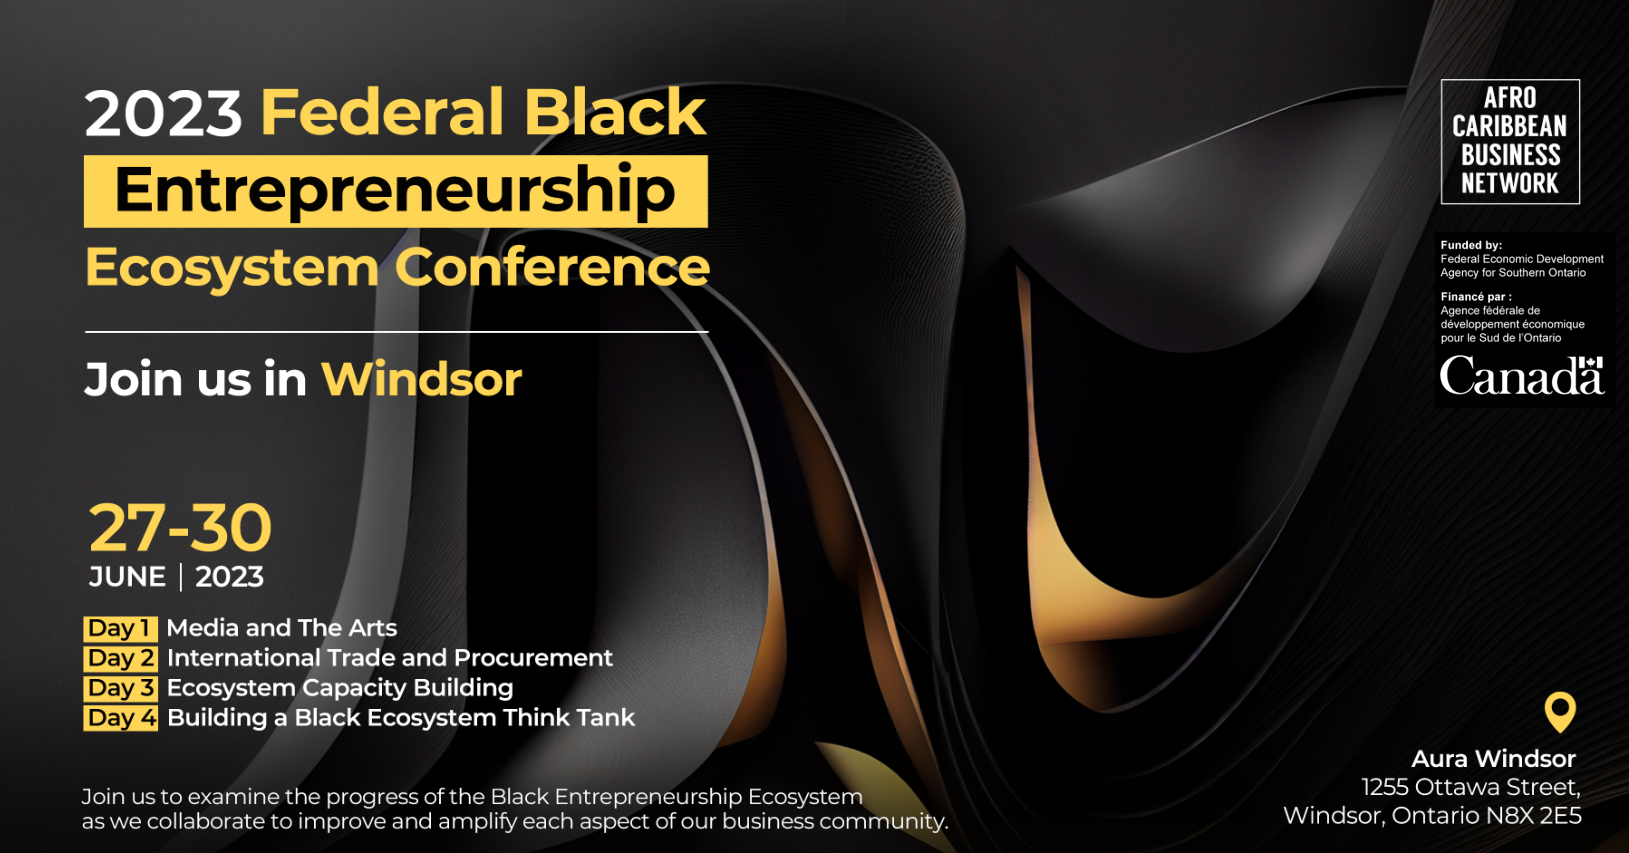 Abstract image featuring black and gold figures and objects. Text says "2023 Federal Black Entrepreneurship Ecosystem Conference. Join us in Windsor. 27 to 30 June 2023. Day 1 Media and the arts. Day 2 International Trade and Procurement. Day 3 ecosystem capacity building. Day 4 building a black ecosystem think tank. Join us as we examine the progress of the Black Entrepreneurship Ecosystem as we collaborate to improve and amplify each aspect of our business community." Features logos of ACBN and government of Canada.